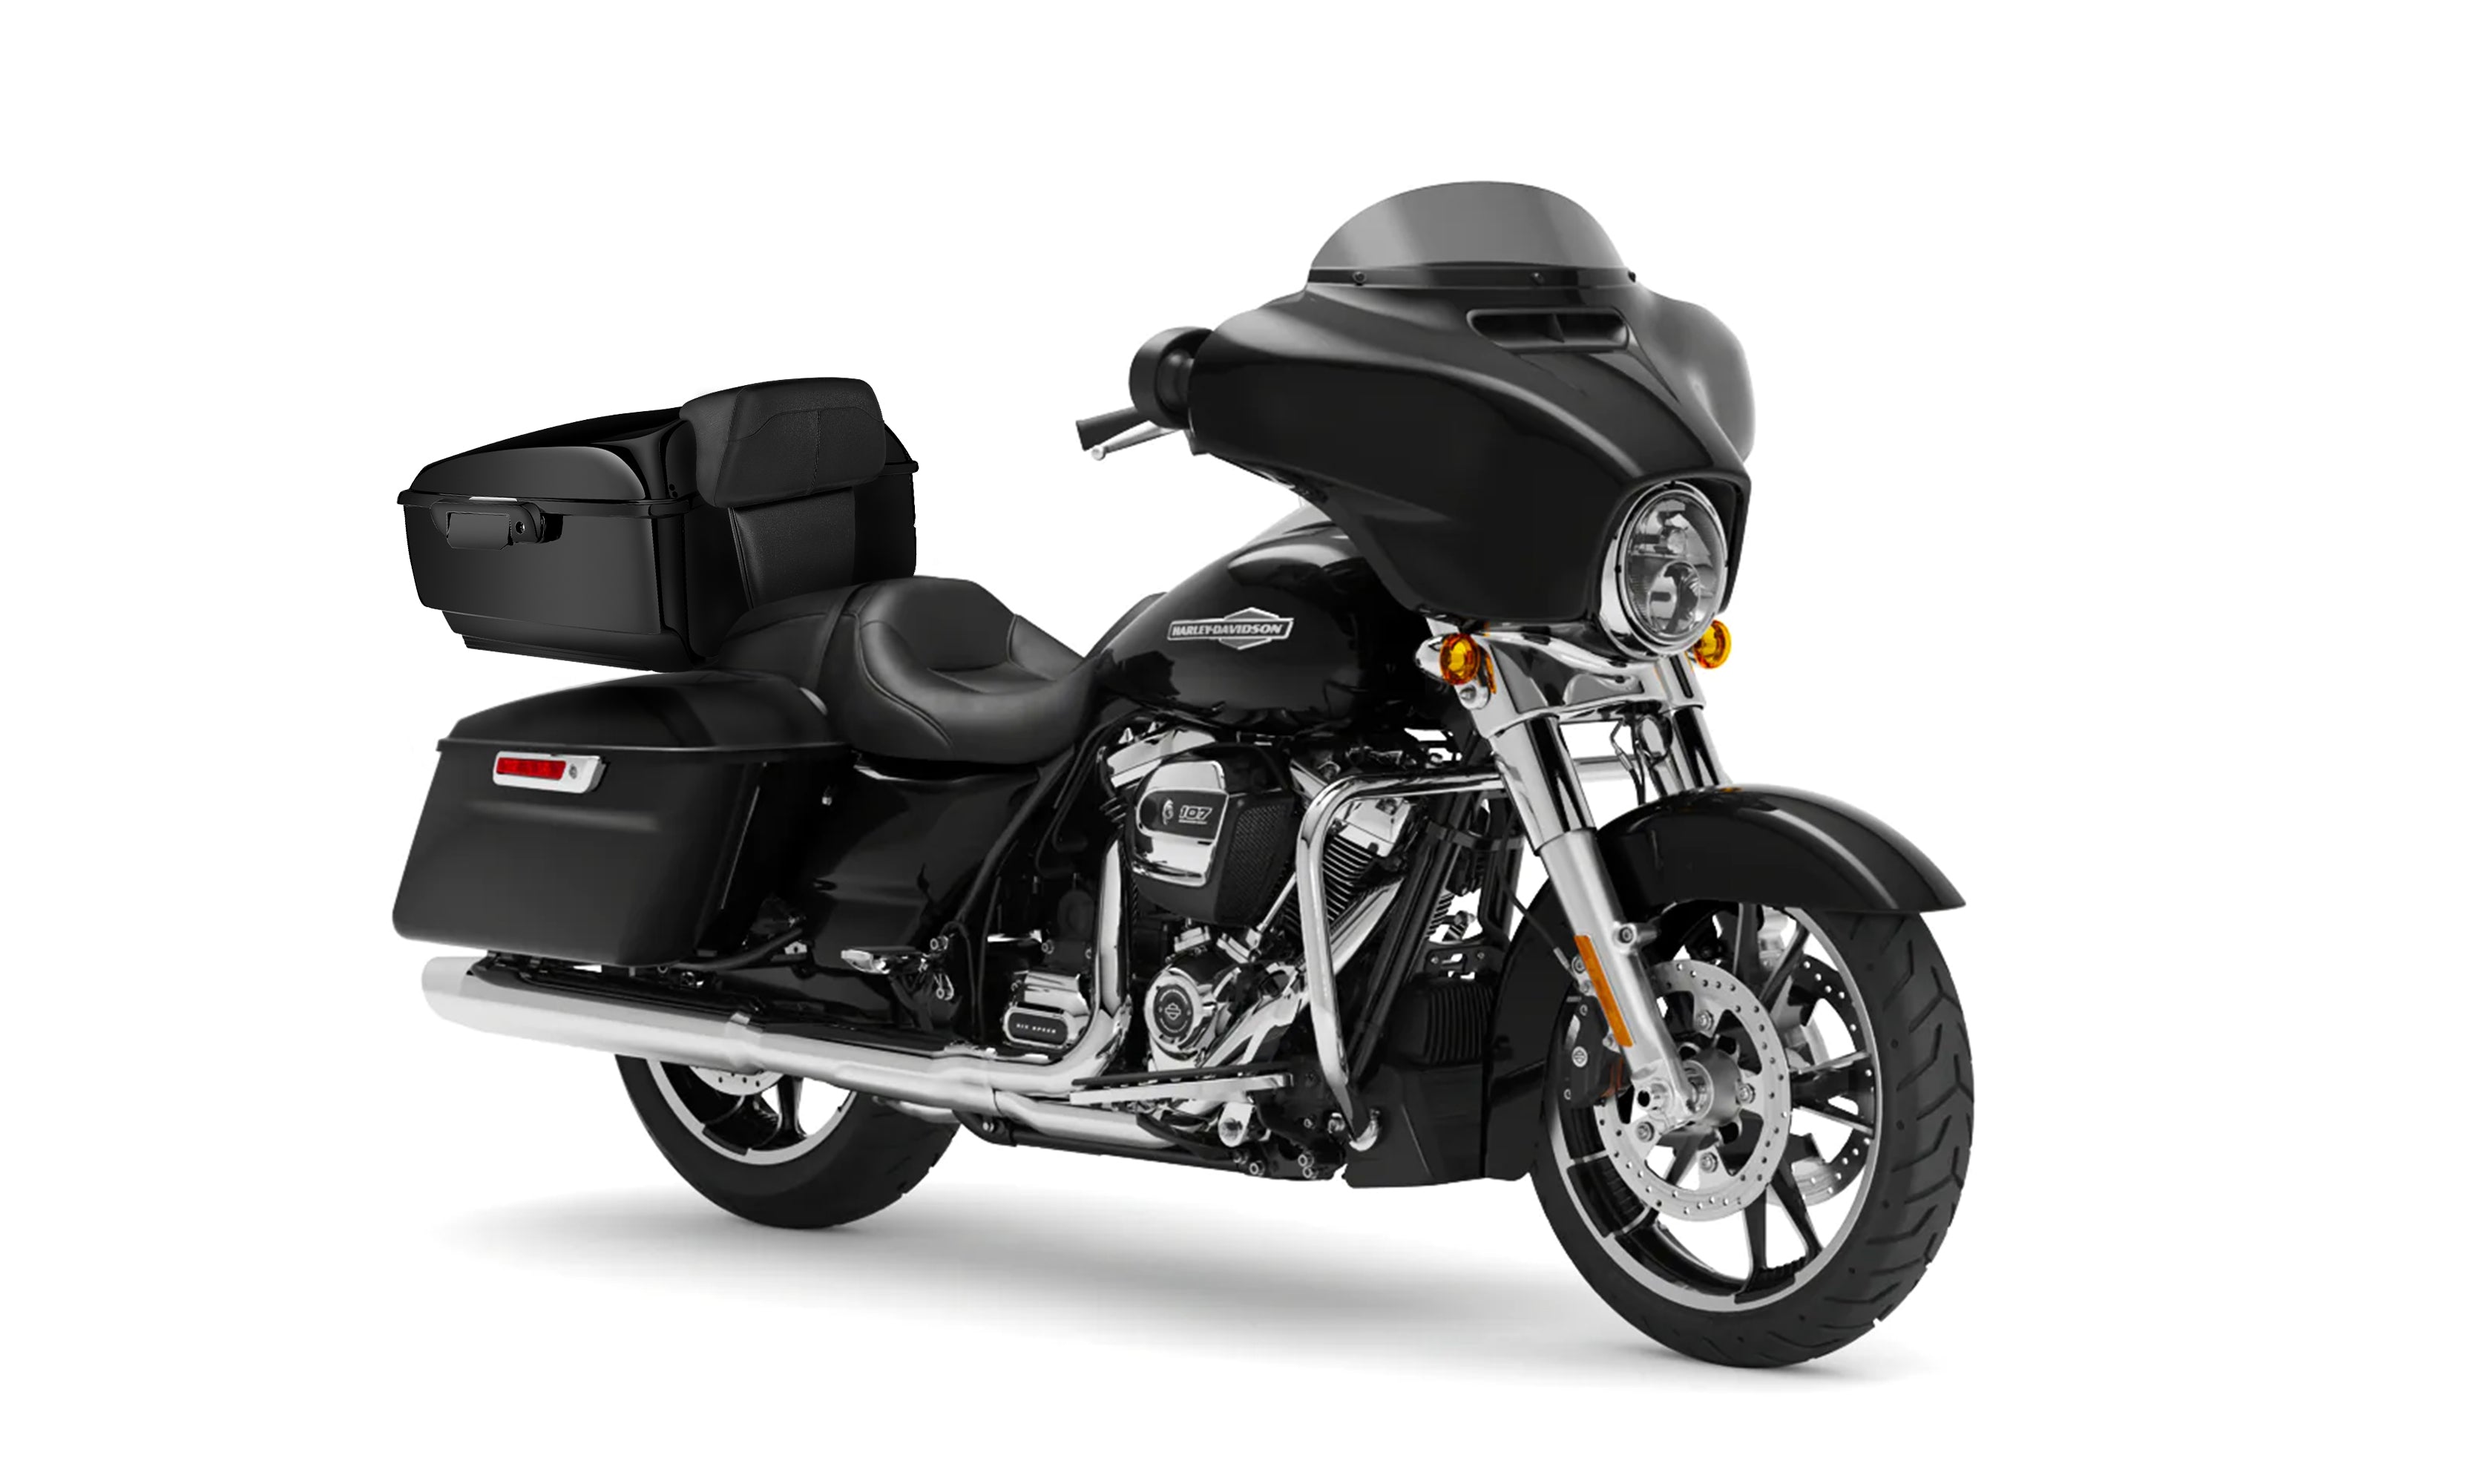 Viking Voyage Tour Pack Back Rest Pad For Harley Touring Road Glide Bag on Bike View @expand